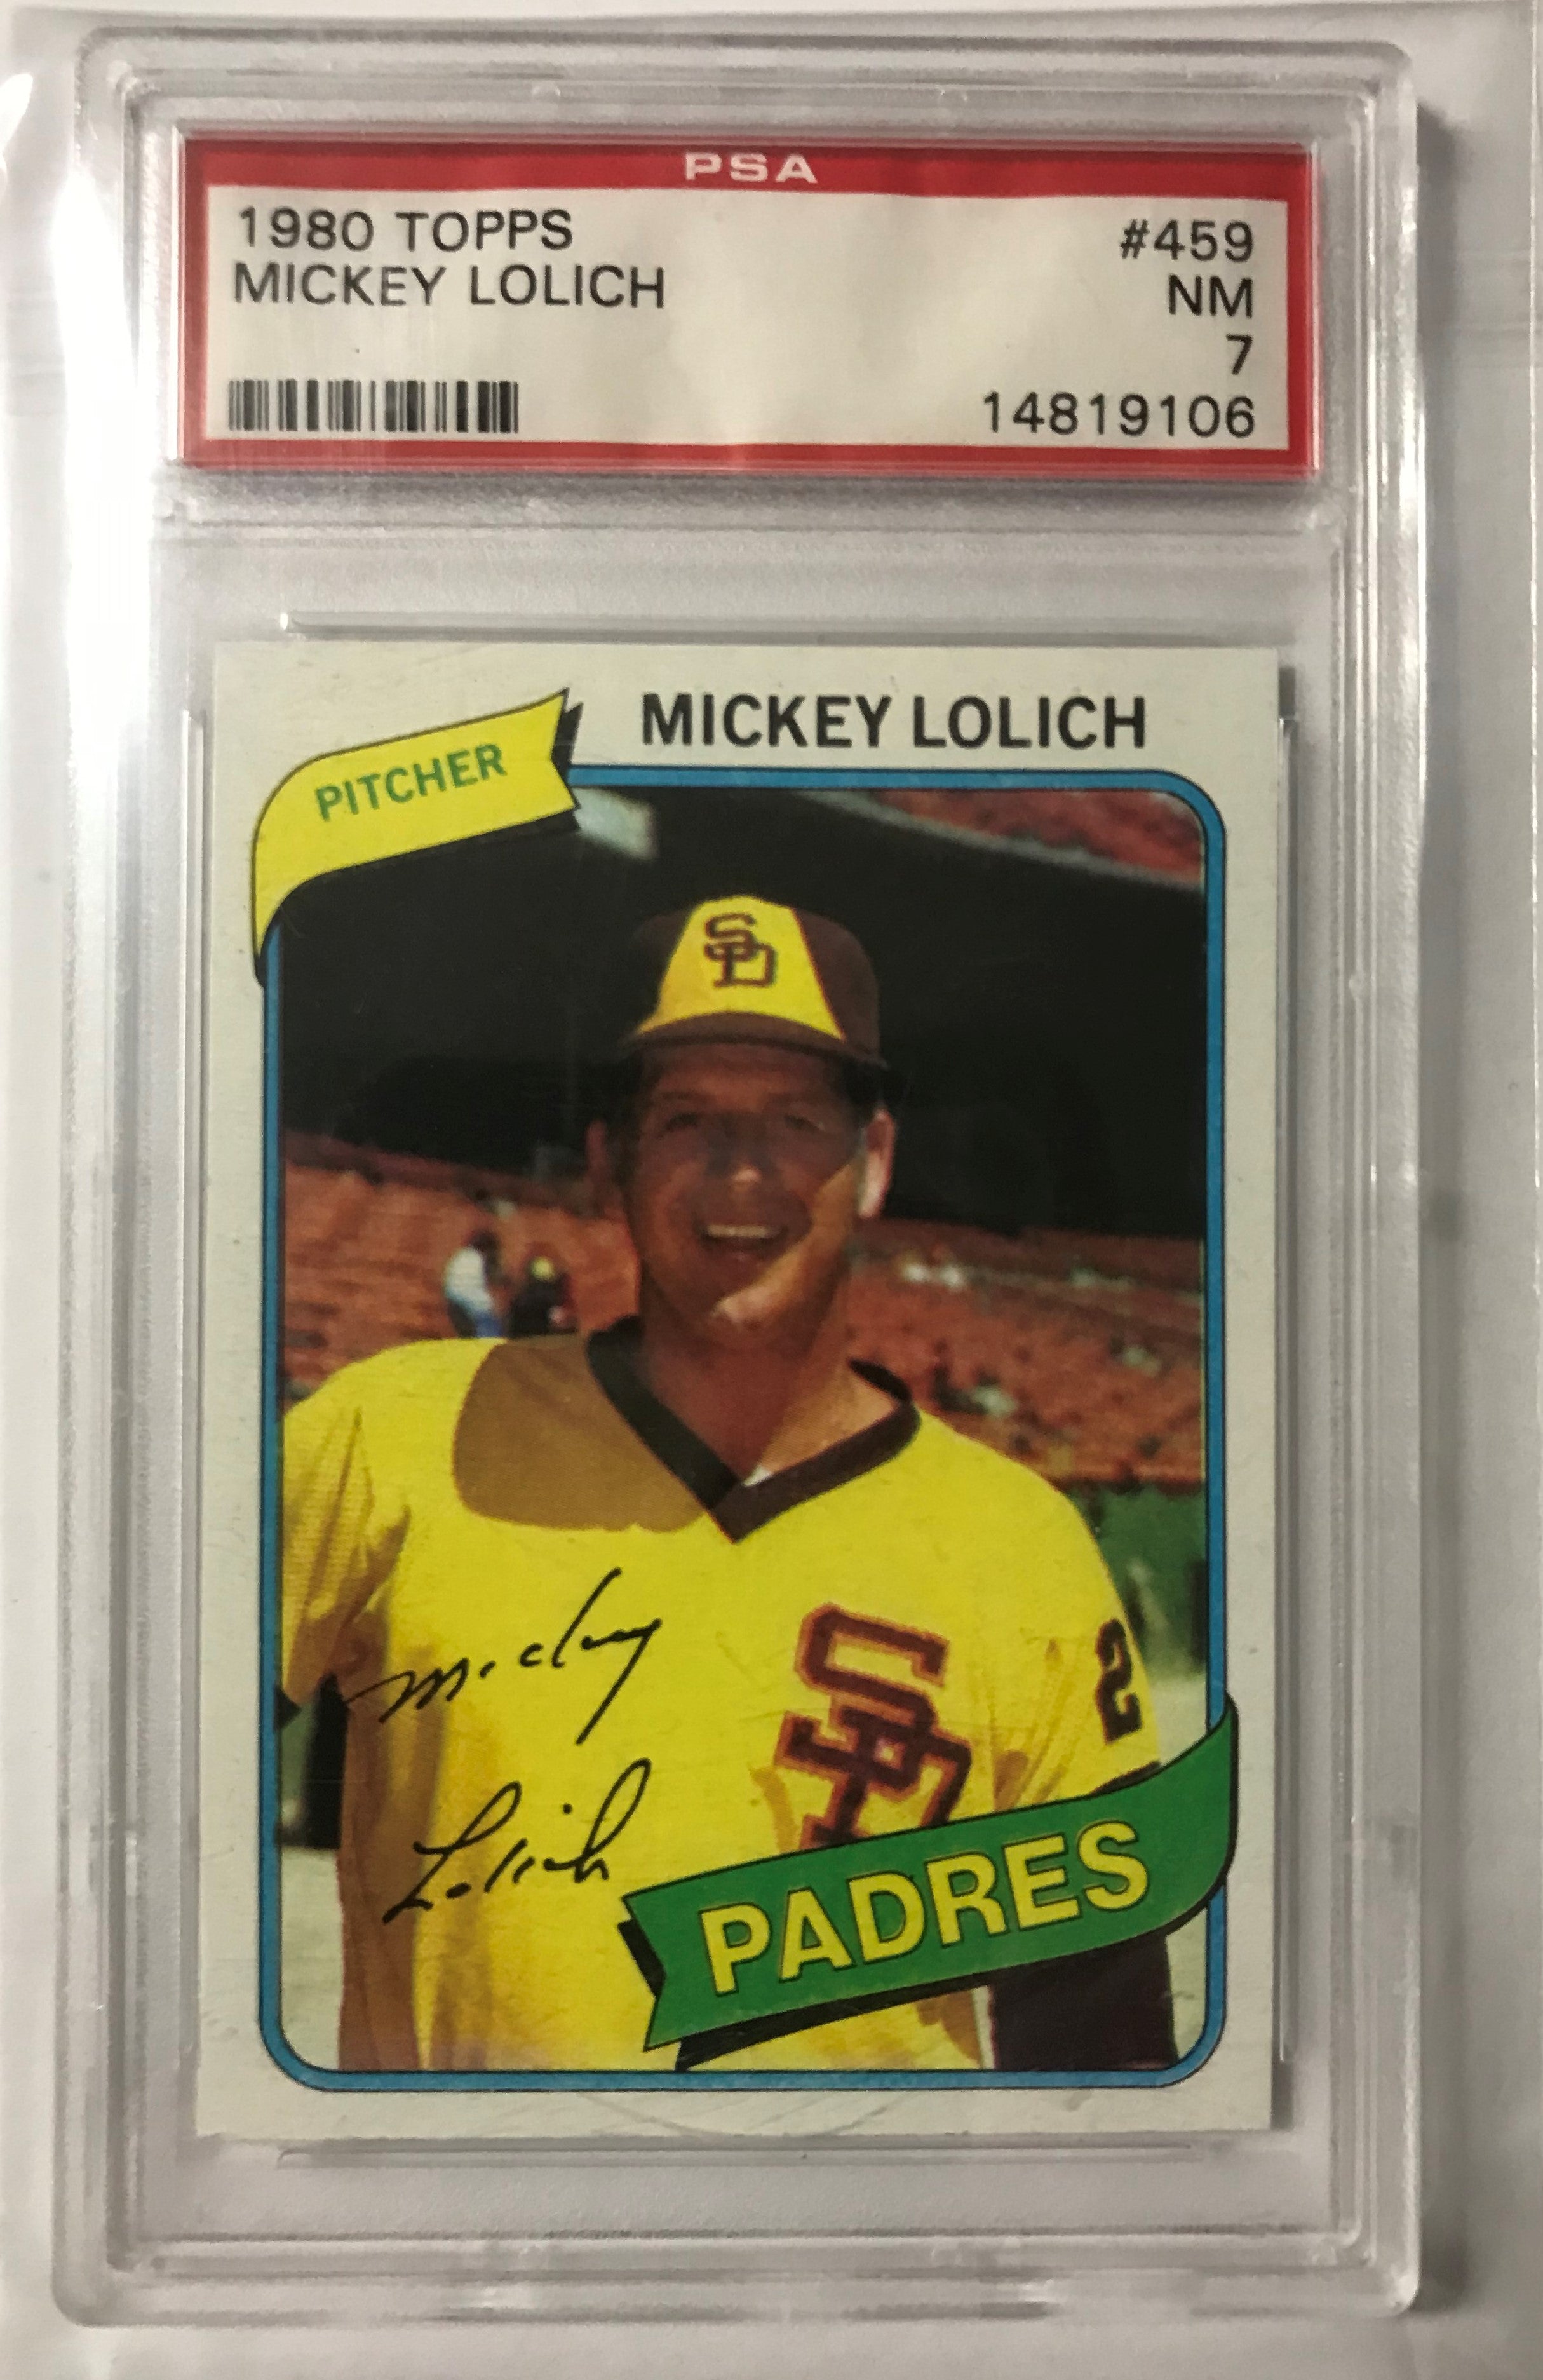 Mickey Lolich 1980 Topps Series Card #459 GRADED PSA 7